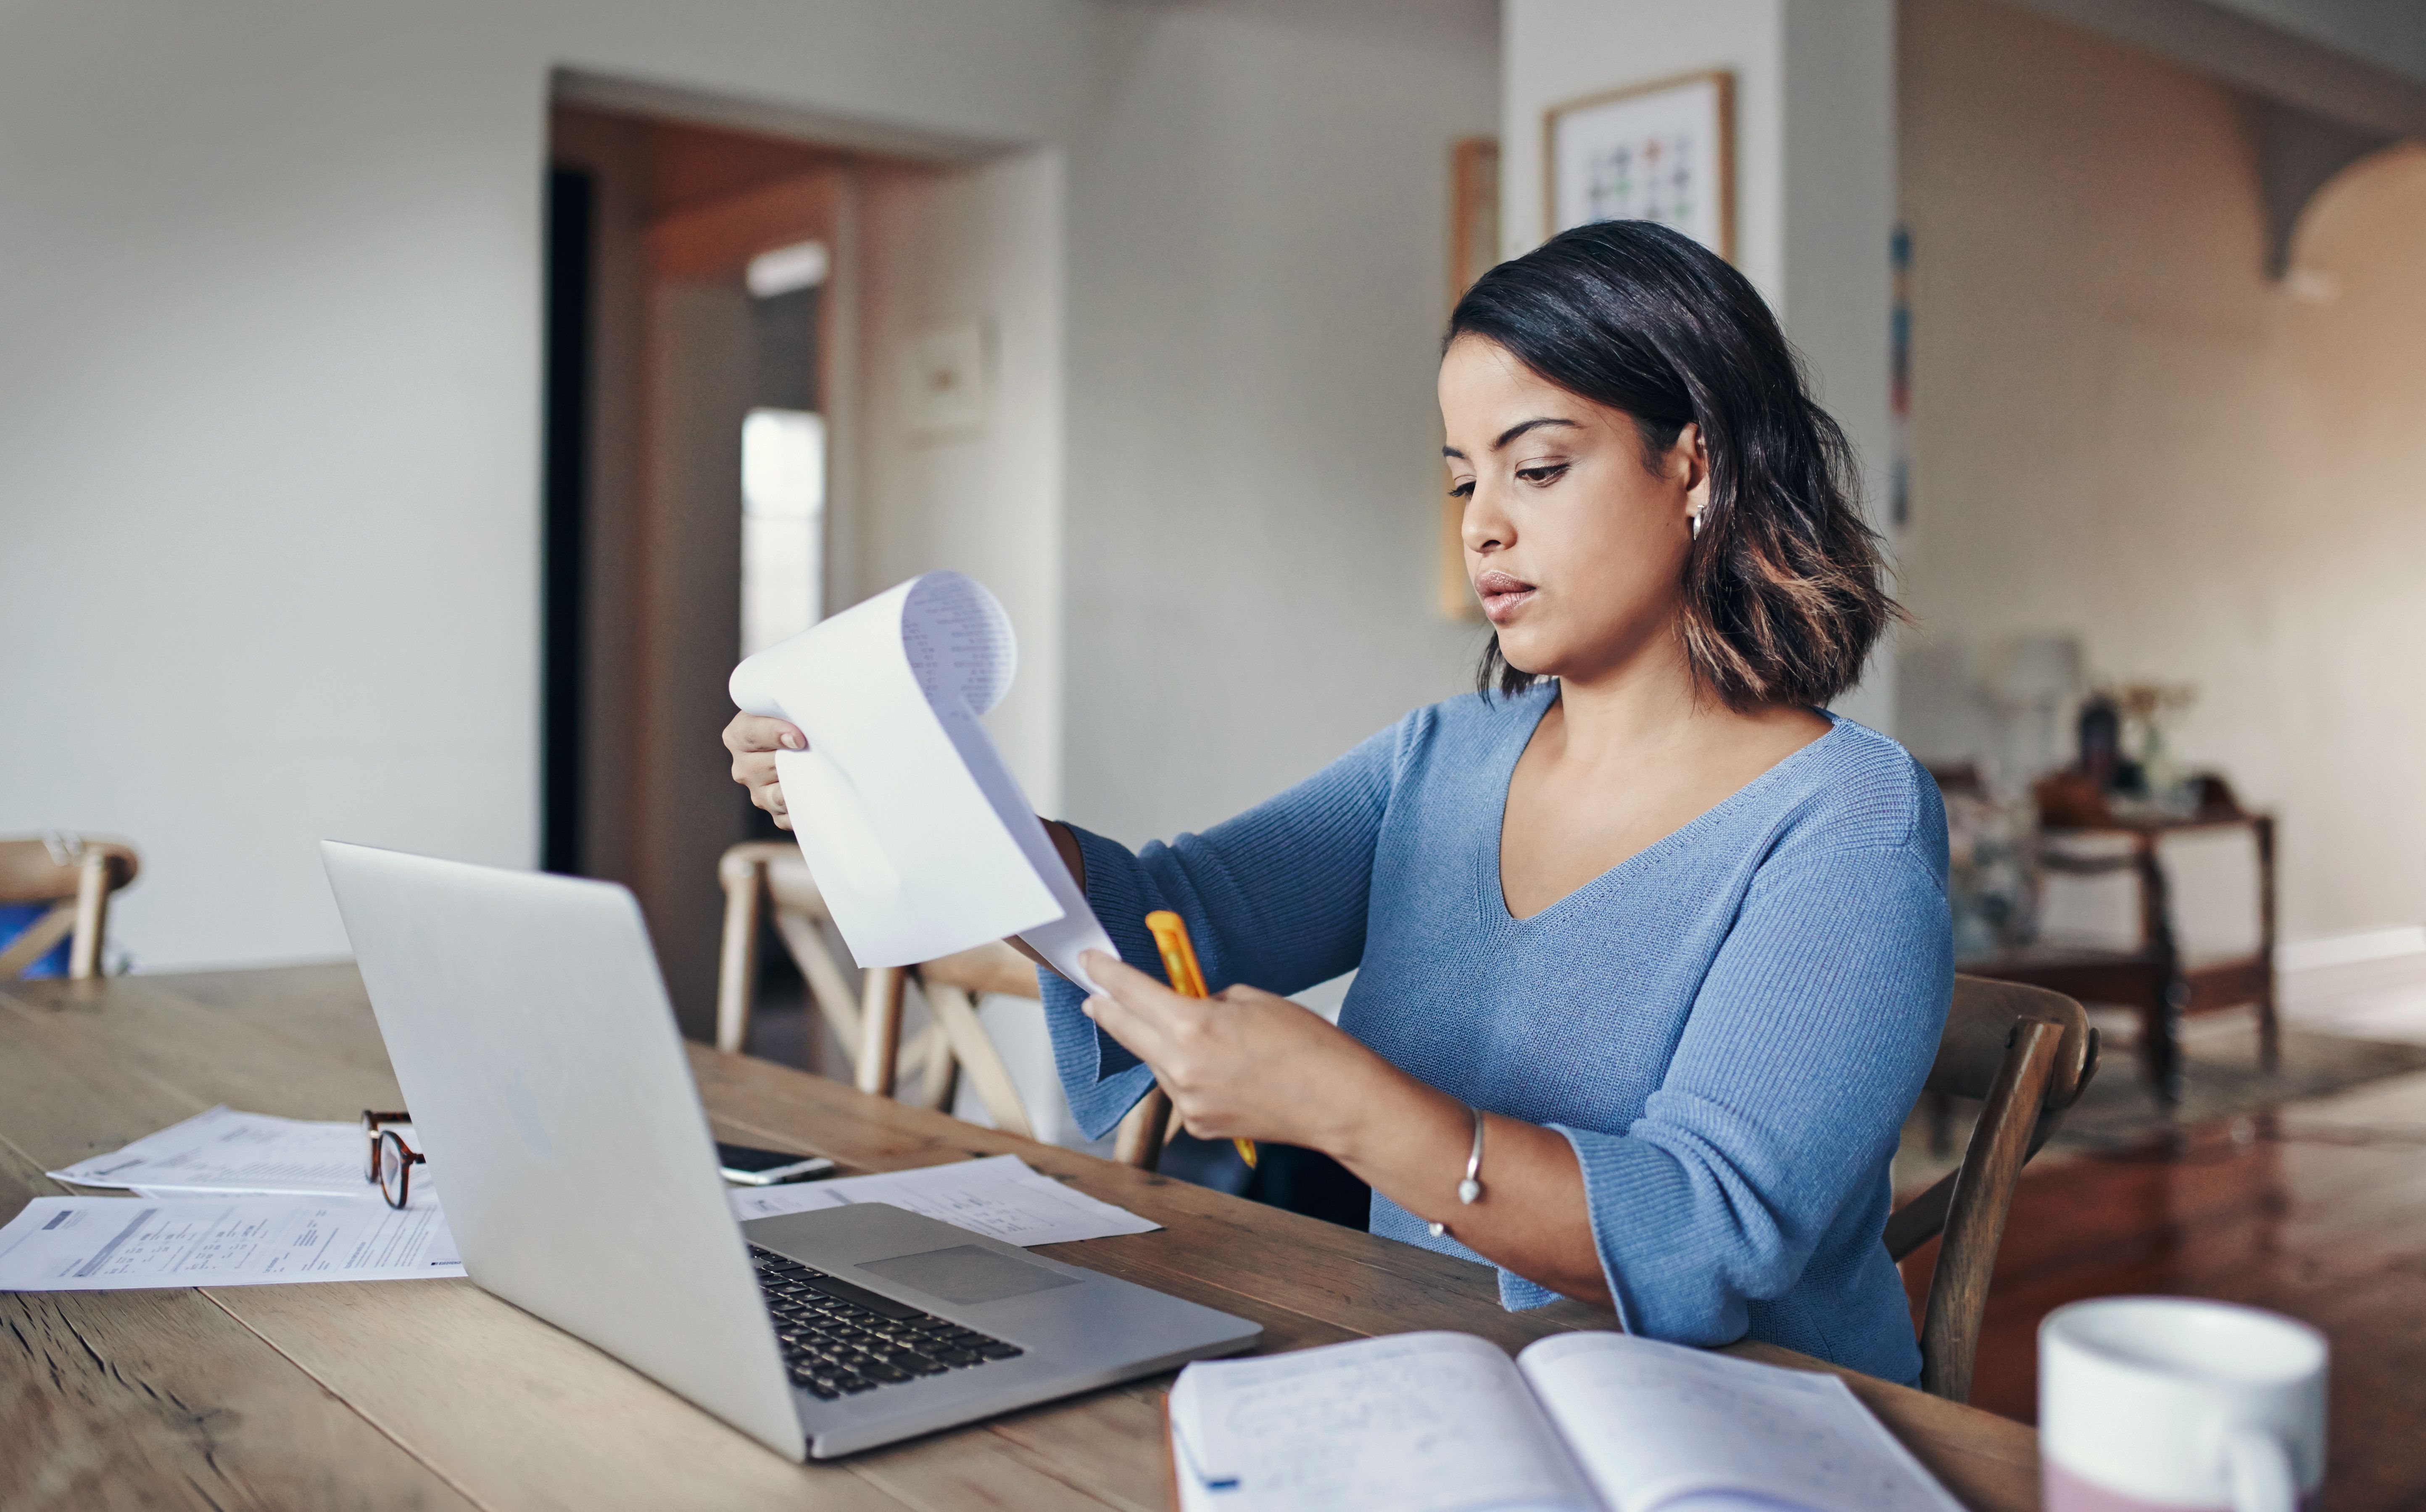 A person holds a pen while looking through a paper document in front of a laptop at home.